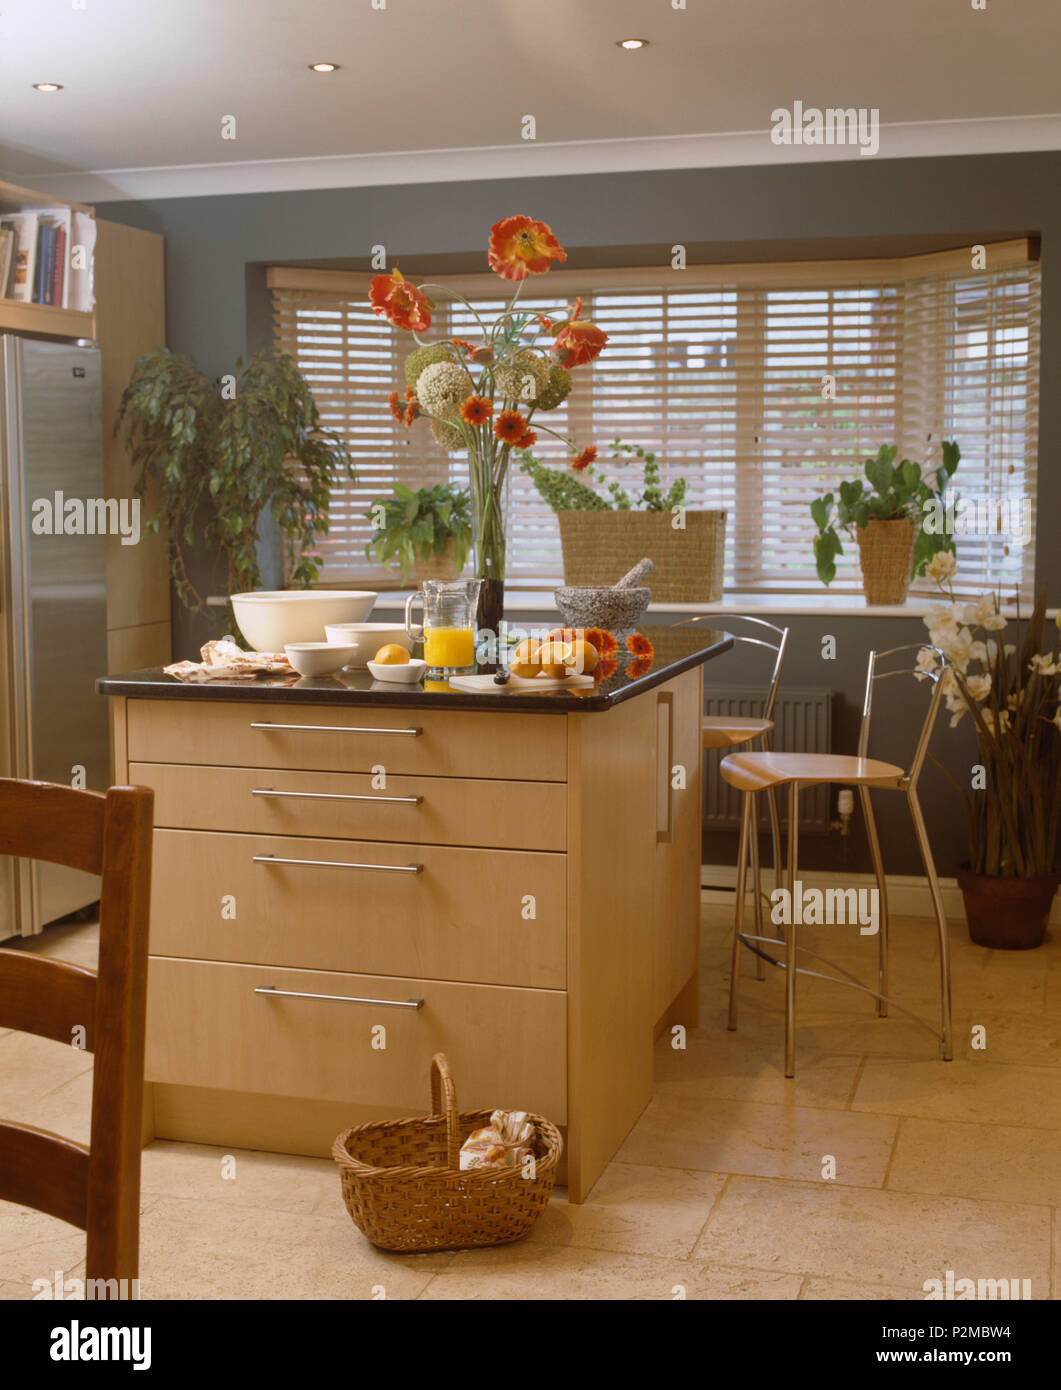 Tall floral display on island unit in modern kitchen with travertine tiled floor Stock Photo